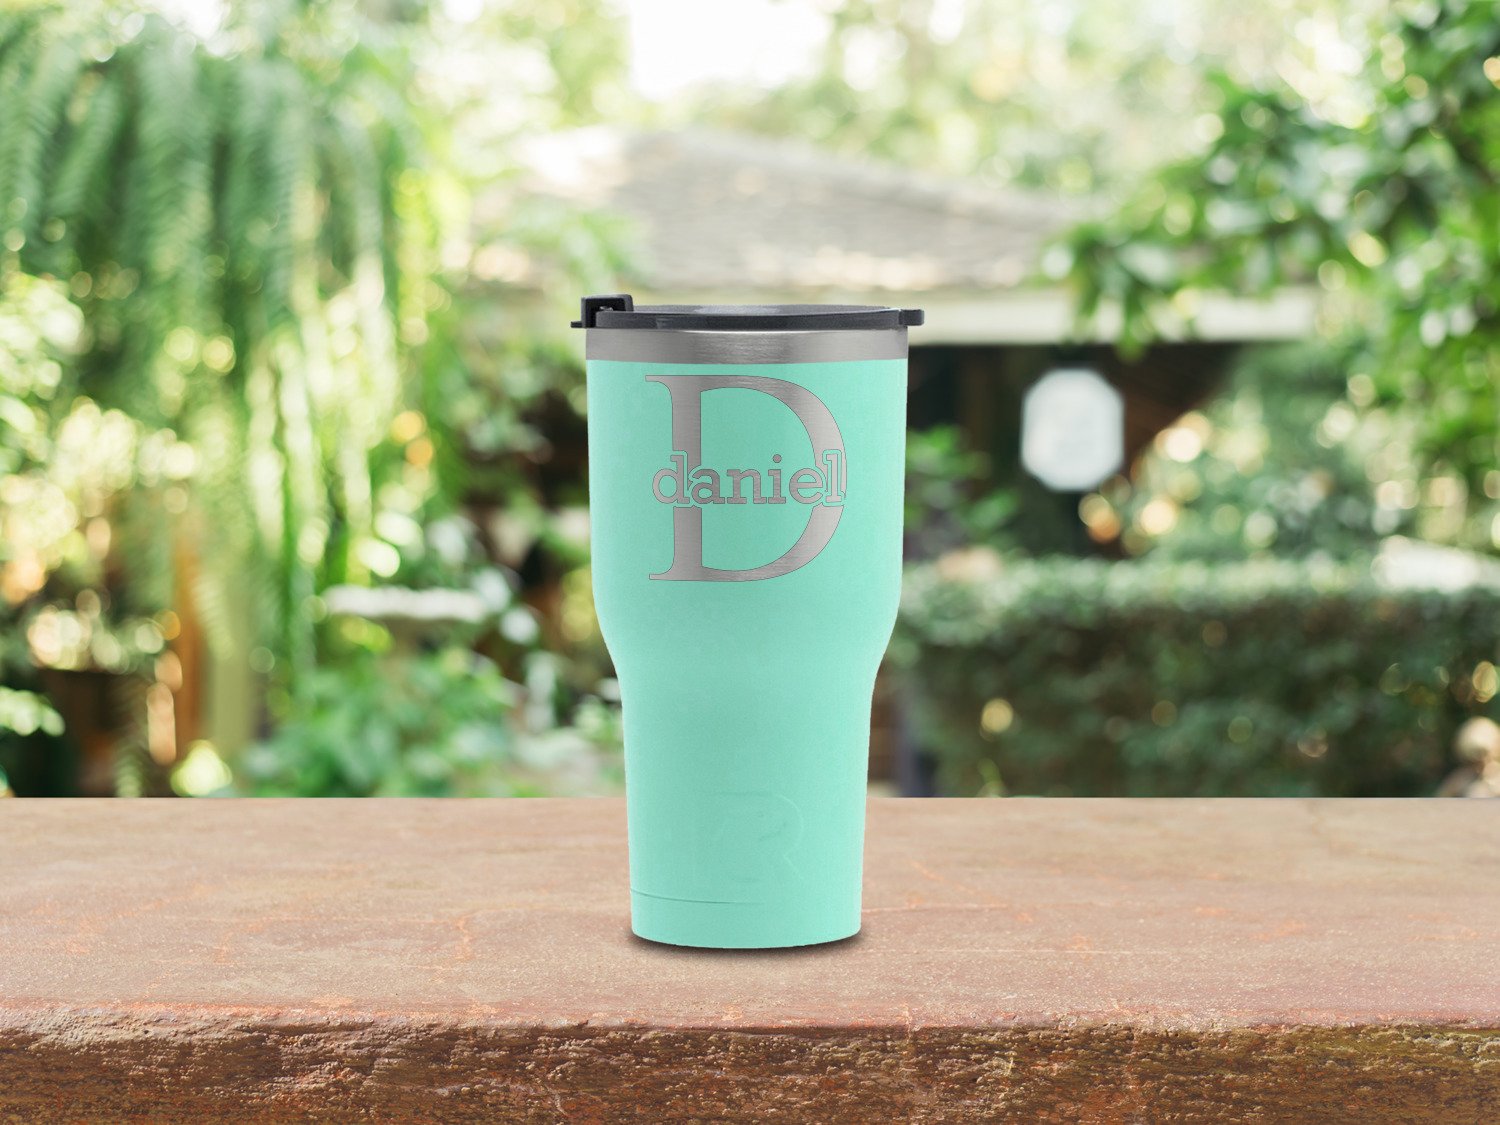 https://www.youcustomizeit.com/common/MAKE/837778/Name-Initial-for-Guys-Teal-RTIC-Tumbler-Lifestyle-Front.jpg?lm=1628741448